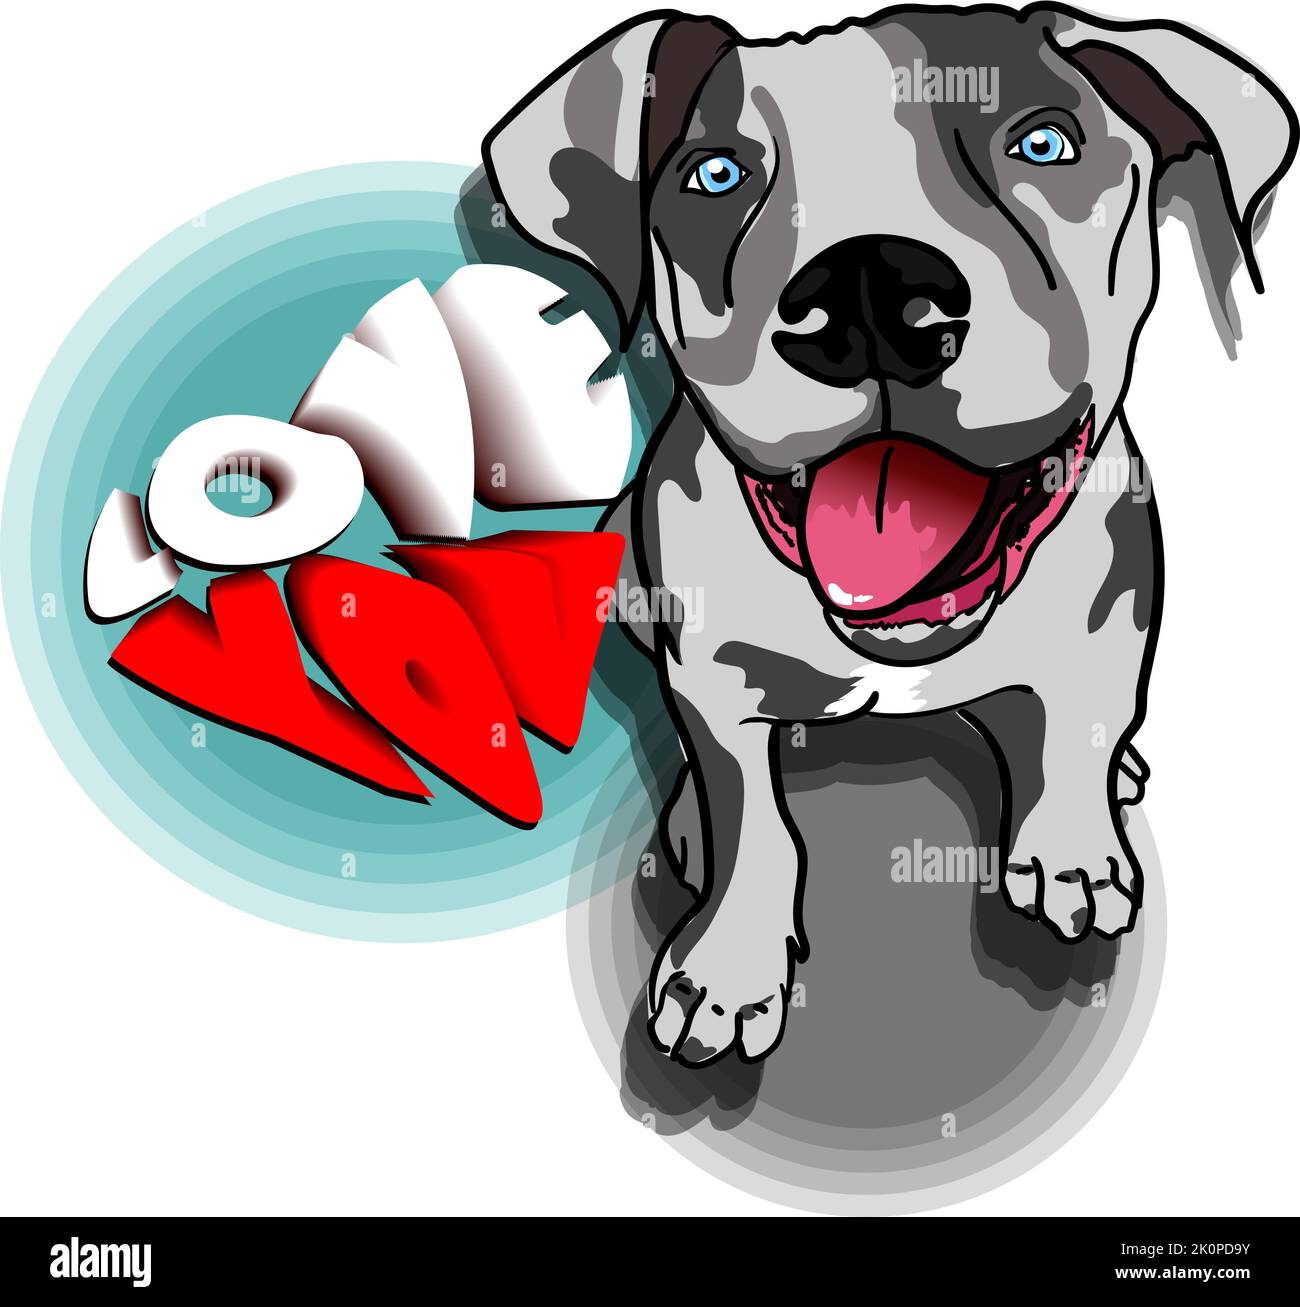 WHITE PUPPY VECTOR WITH TEXT I LOVE YOU Stock Vector